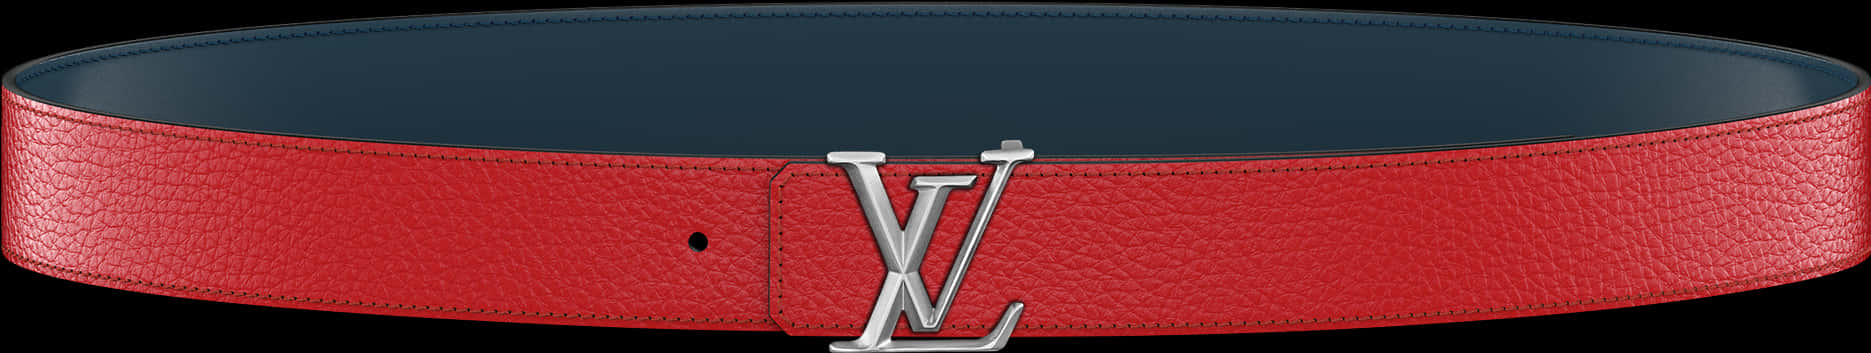 Louis Vuitton Red Leather Beltwith Silver L V Buckle PNG